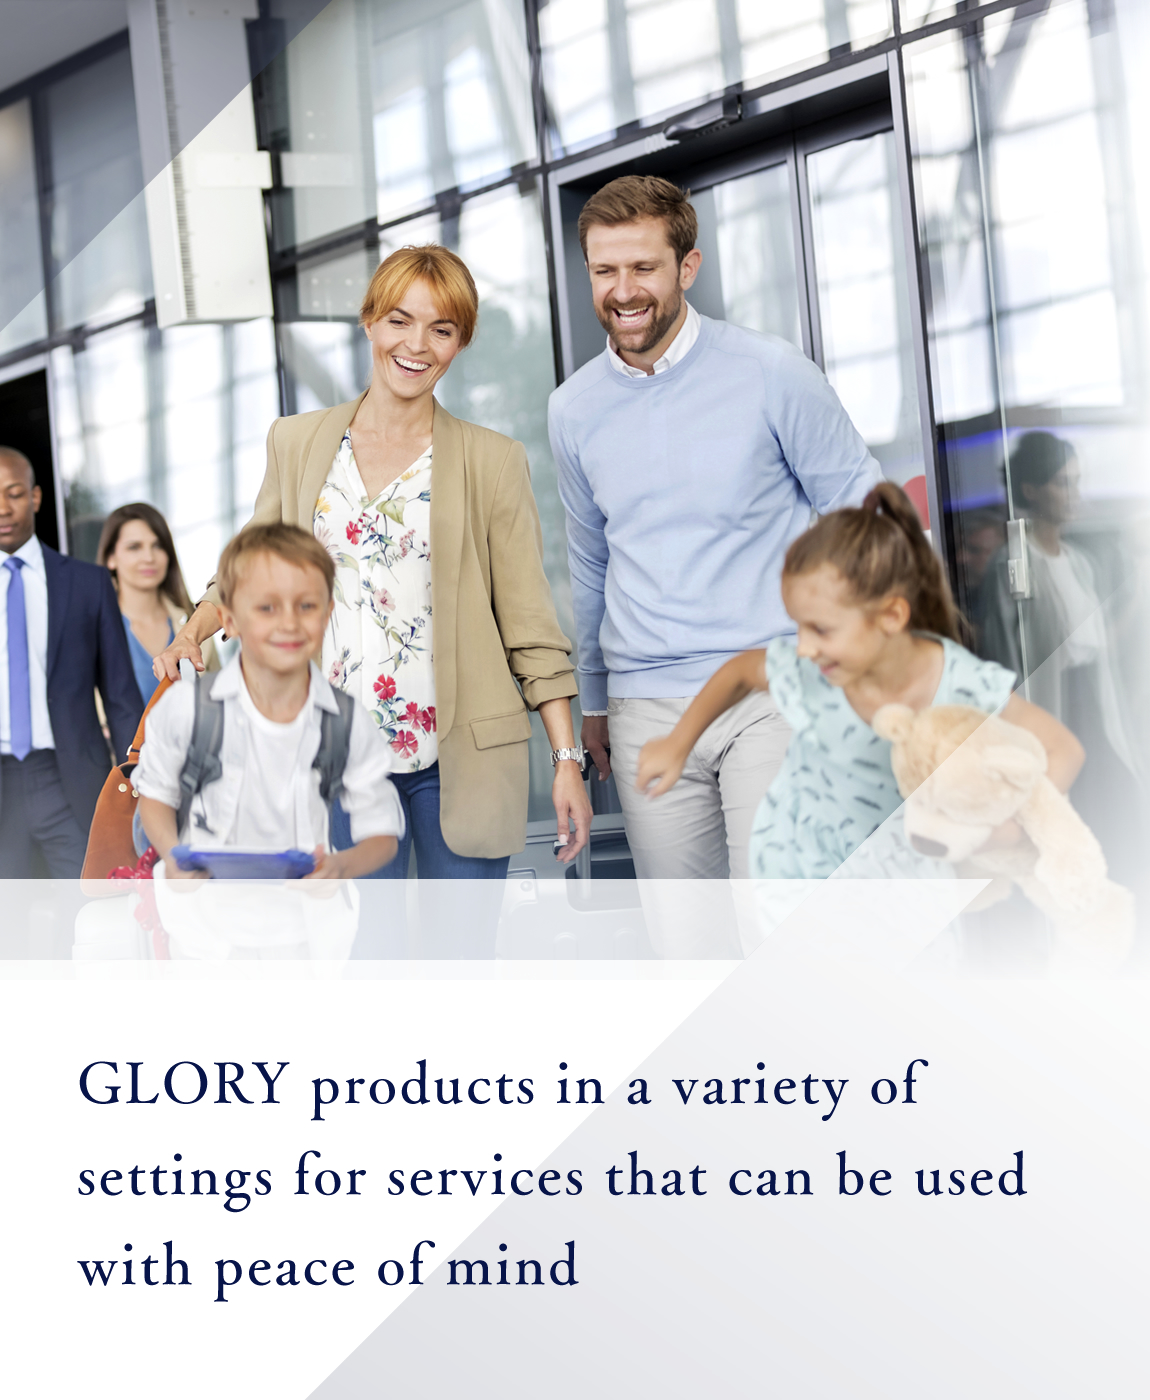 GLORY products in a variety of settings for services that can be used with peace of mind